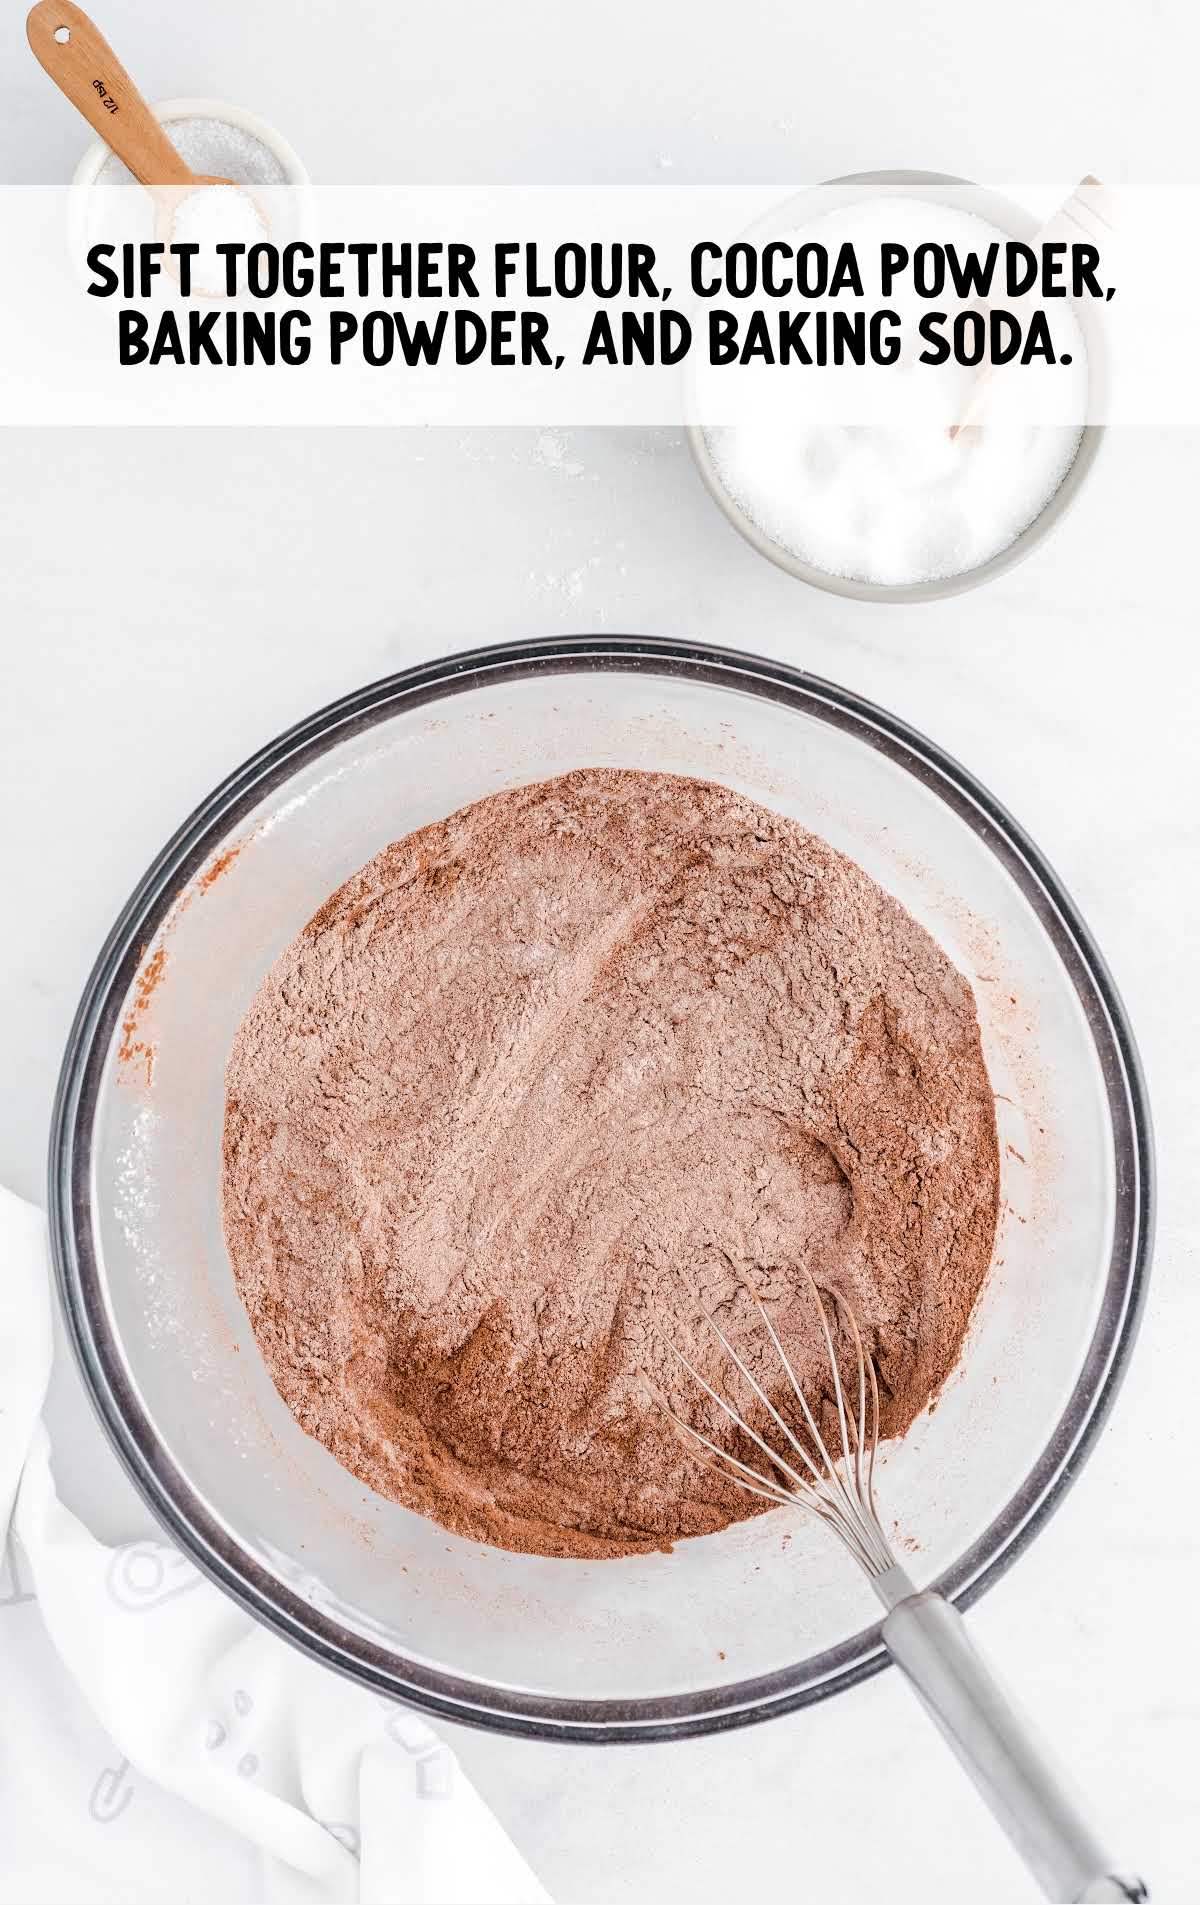 flour, cocoa powder, baking powder, and baking soda whisked together in a bowl